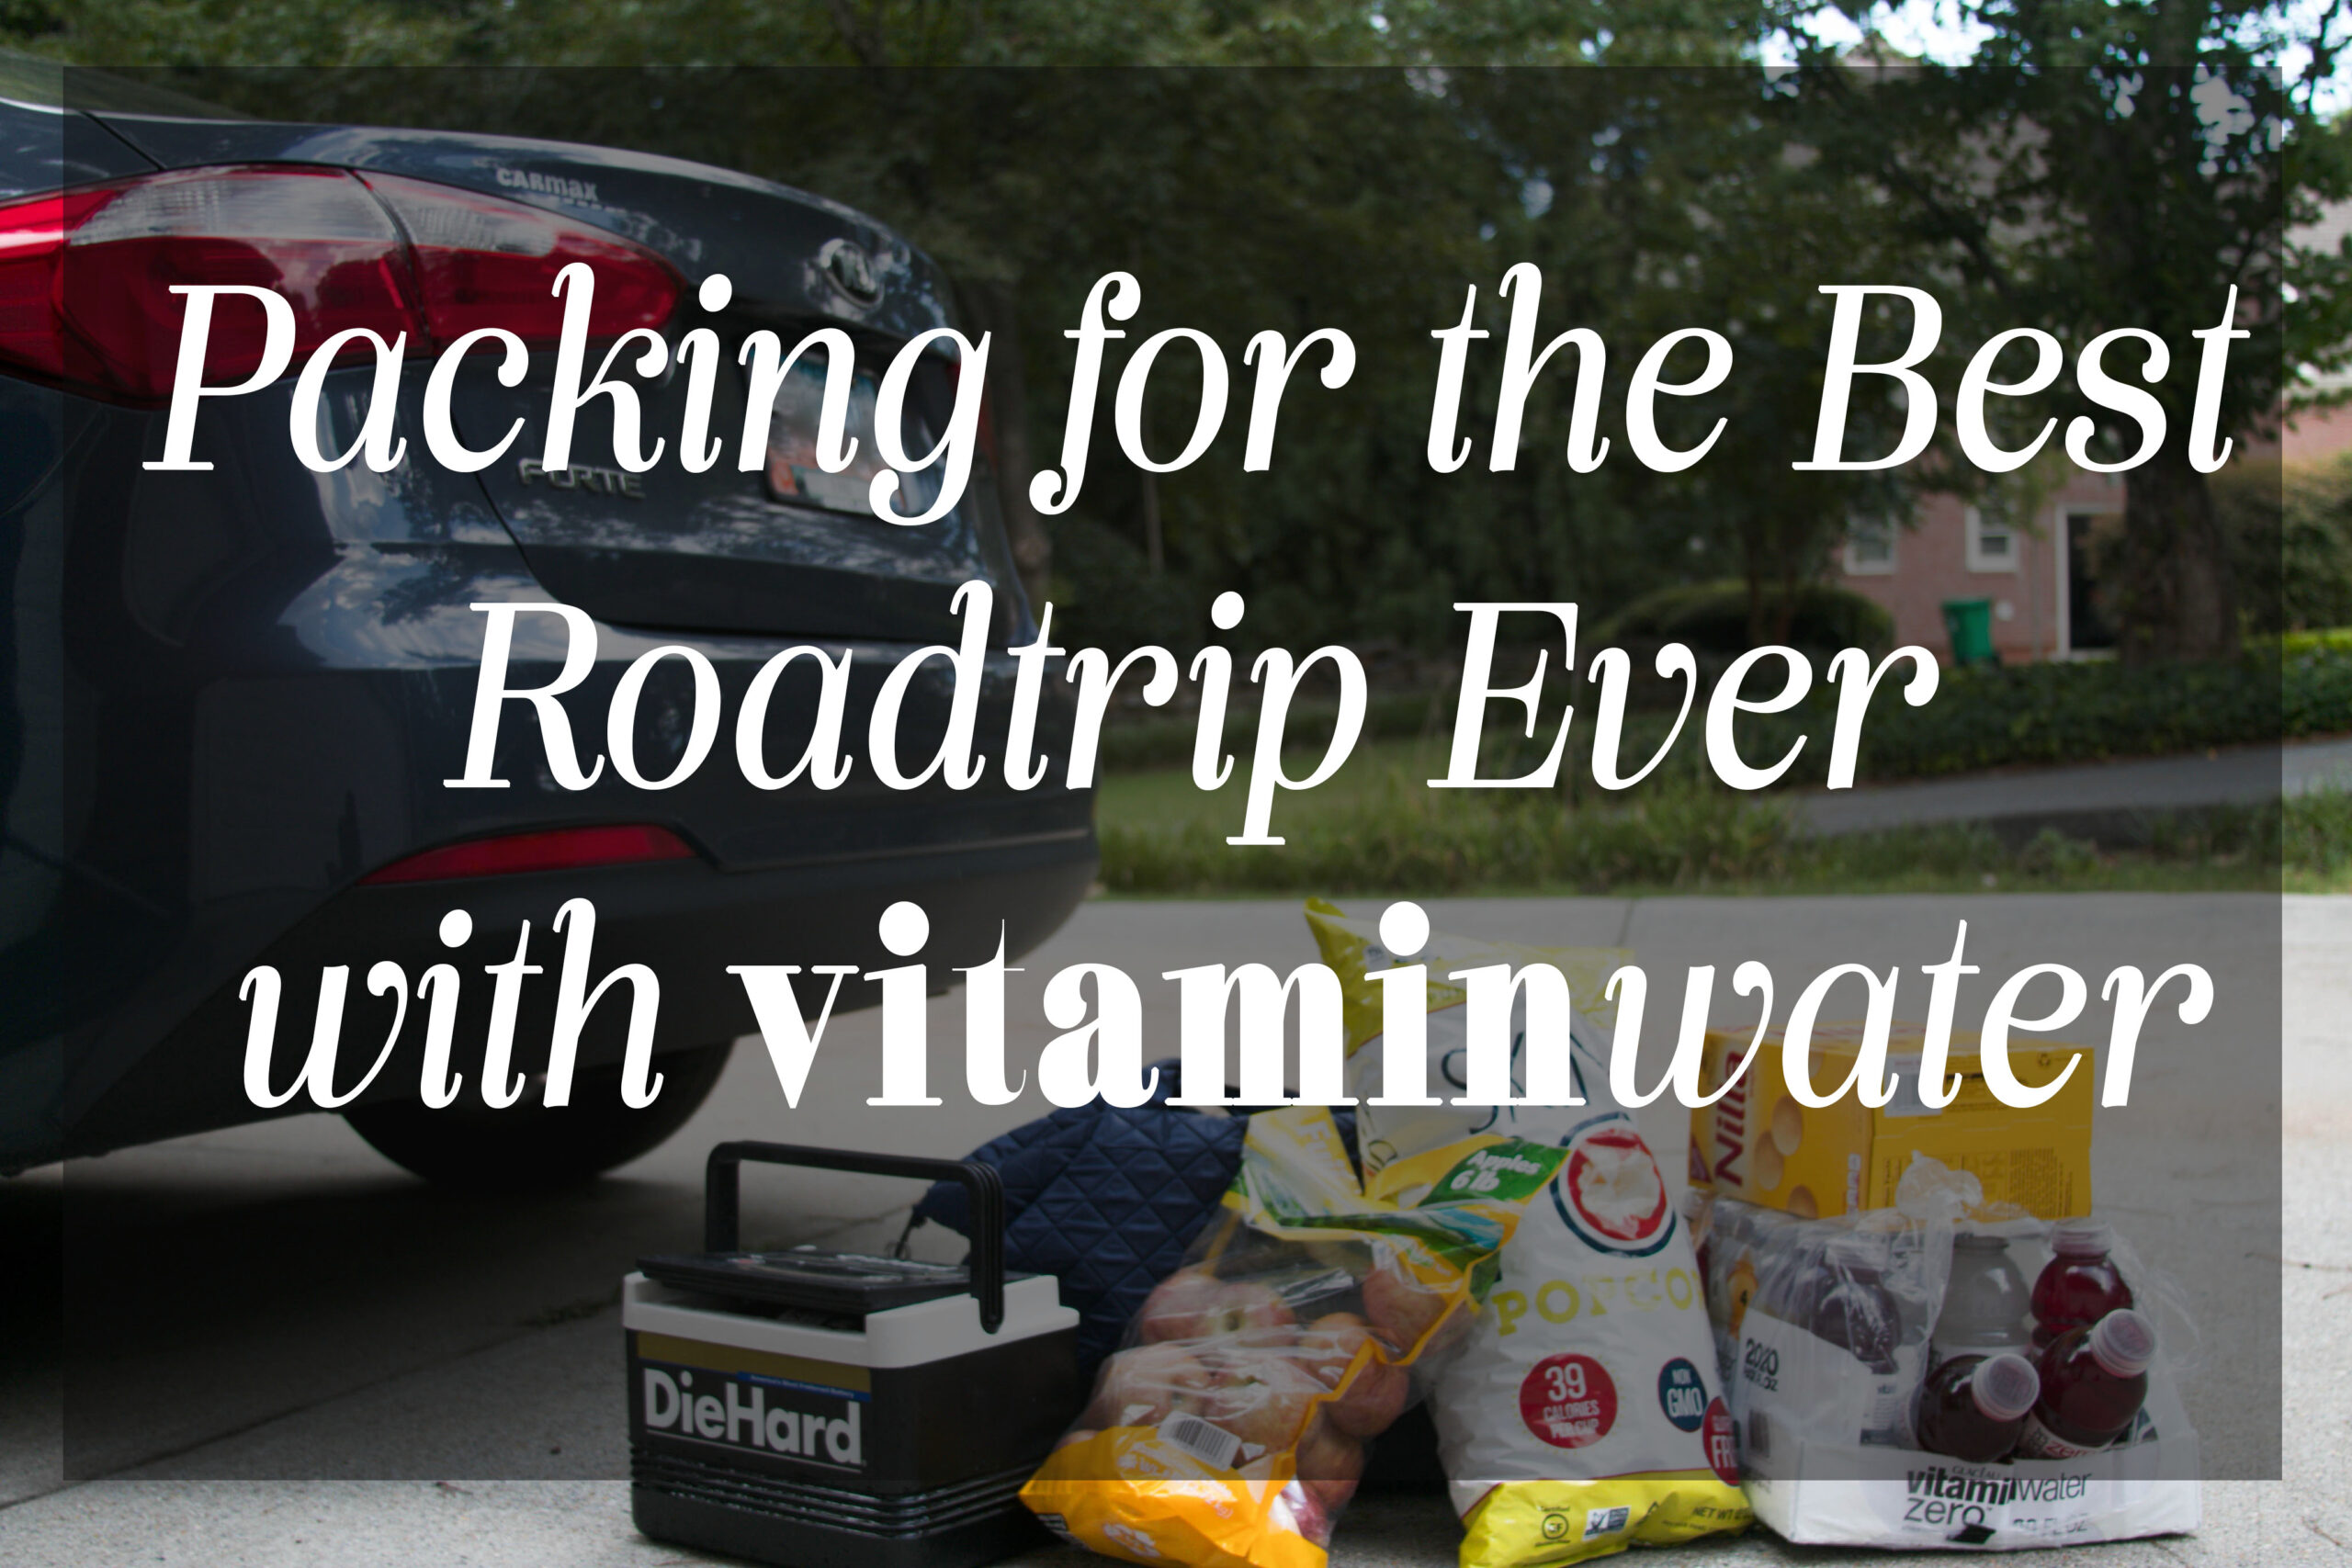 Jordan Taylor C - Packing for the Best Roadtrip Ever with VitaminWater *